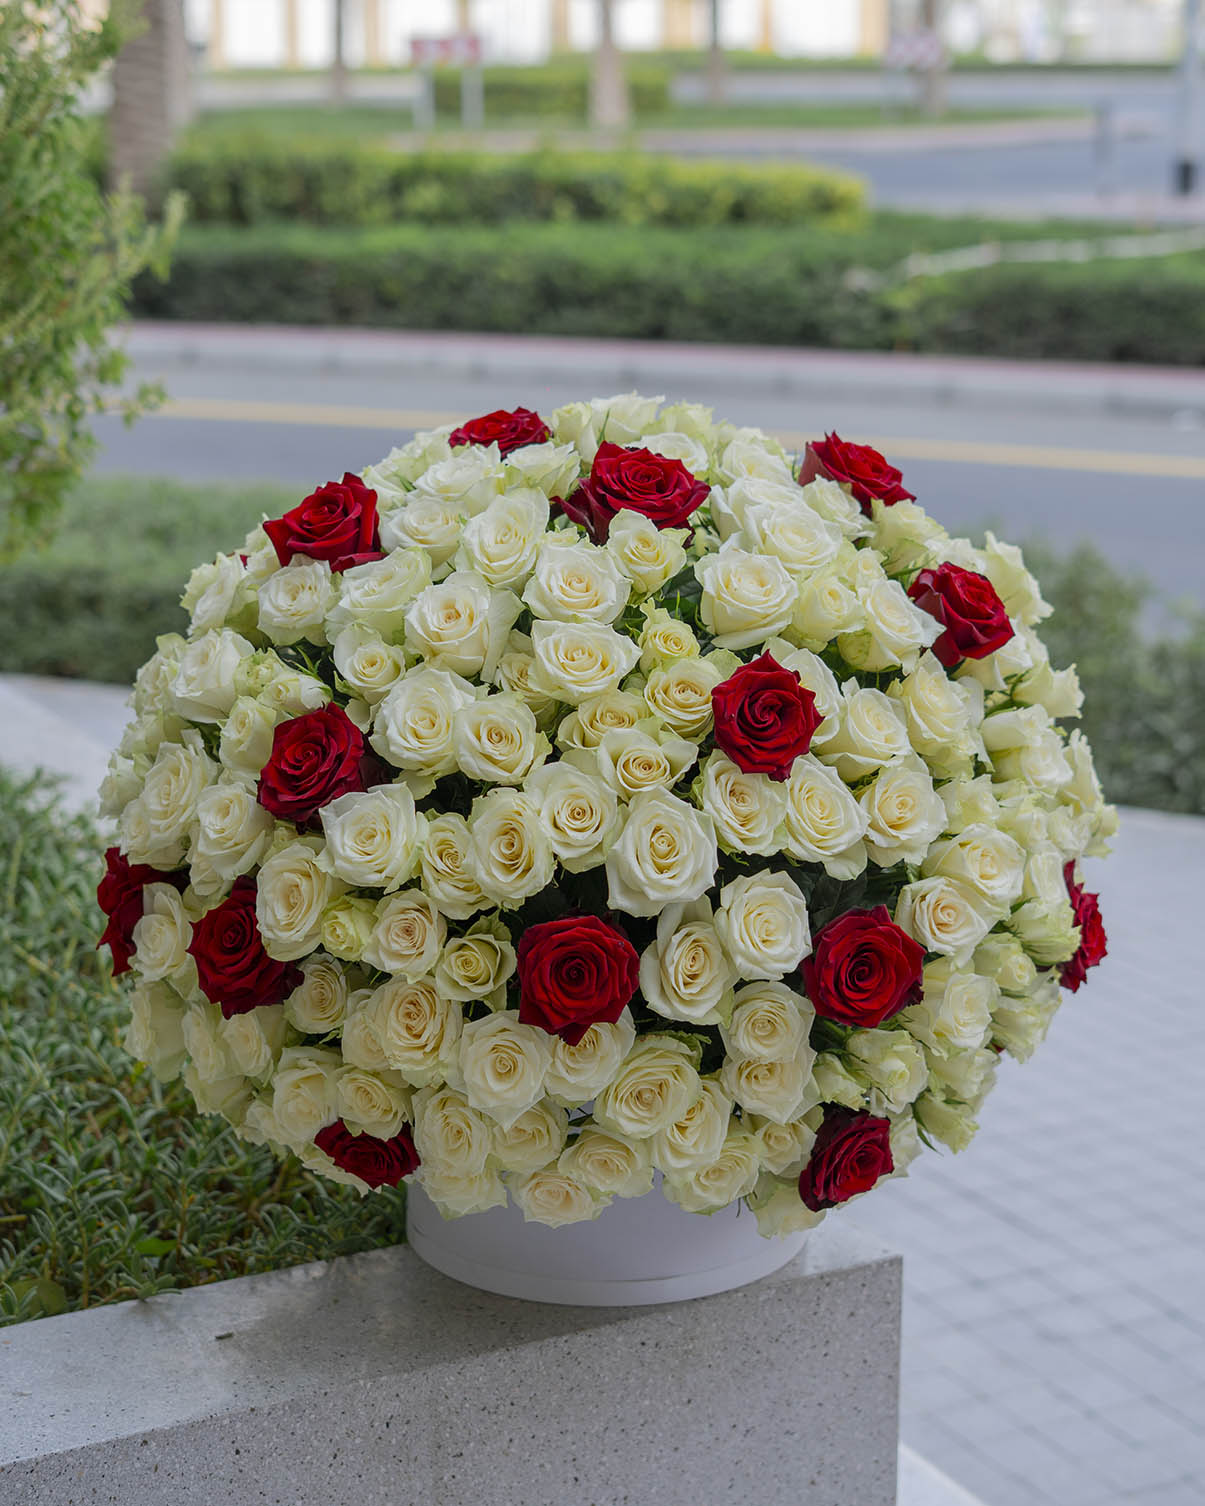 Amore red-white roses arrangement